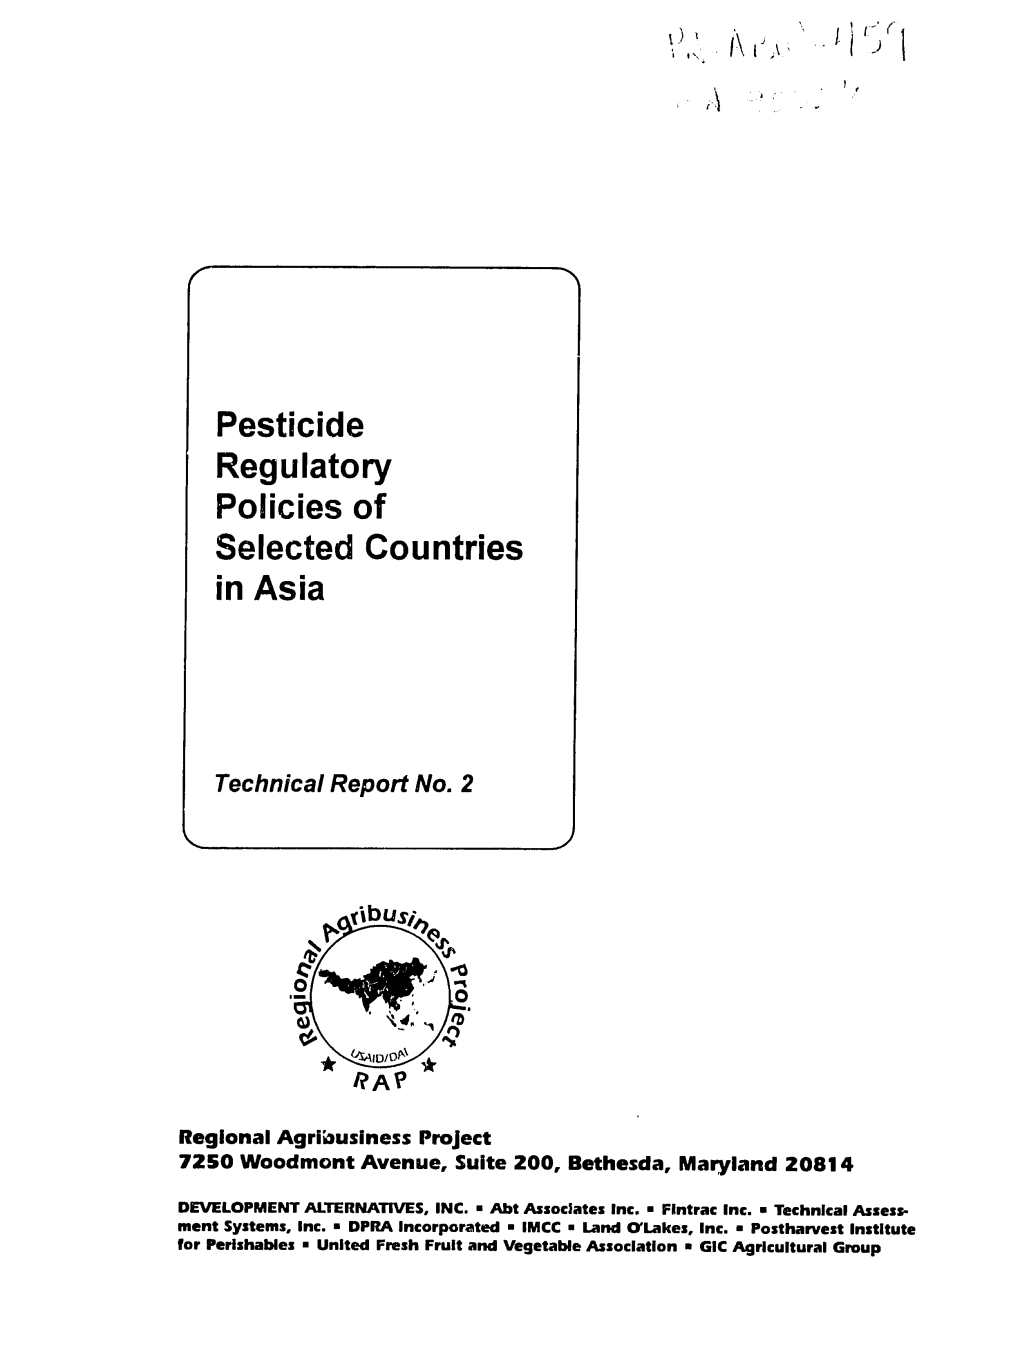 Pesticide Regulatory Policies of Selected Countries in Asia